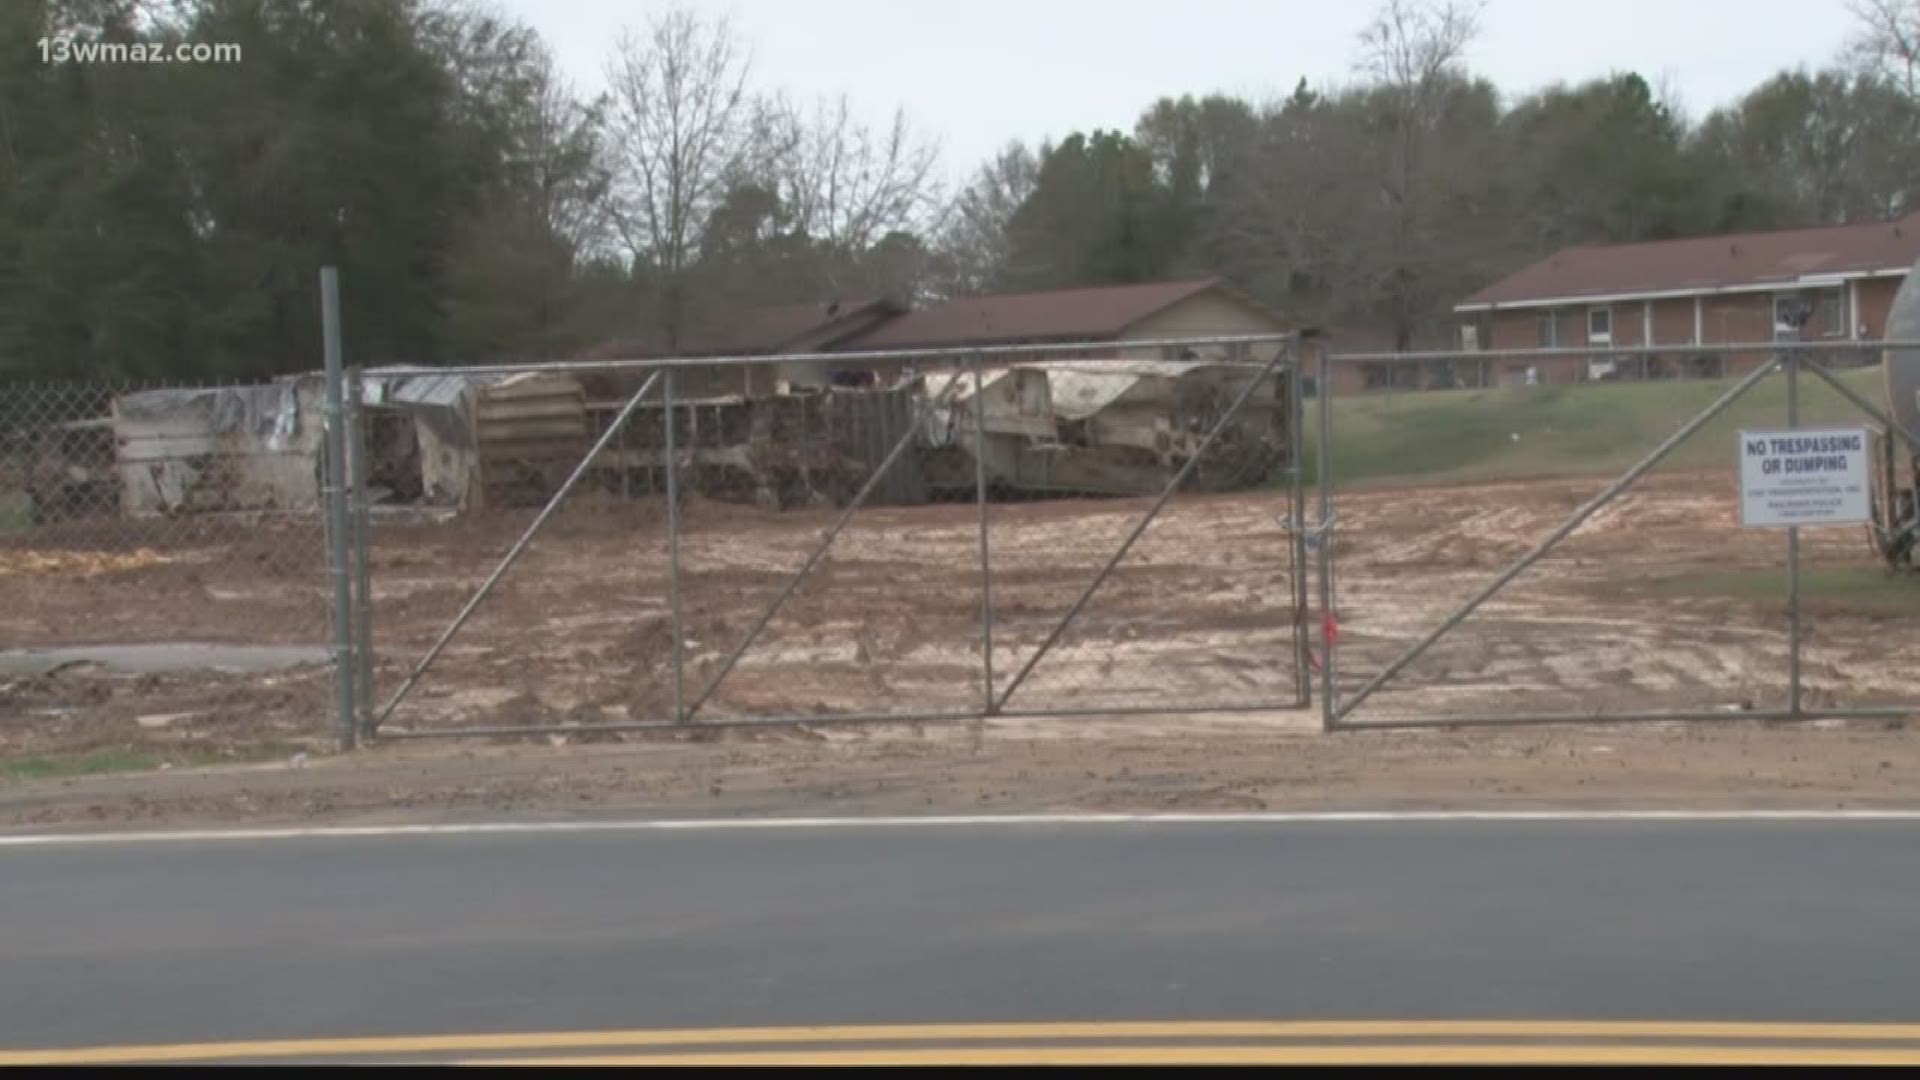 Folks in Byromville can expect to see a detour this week on Highway 90 as CSX Railroad crews do some repairs where a major derailment happened last year